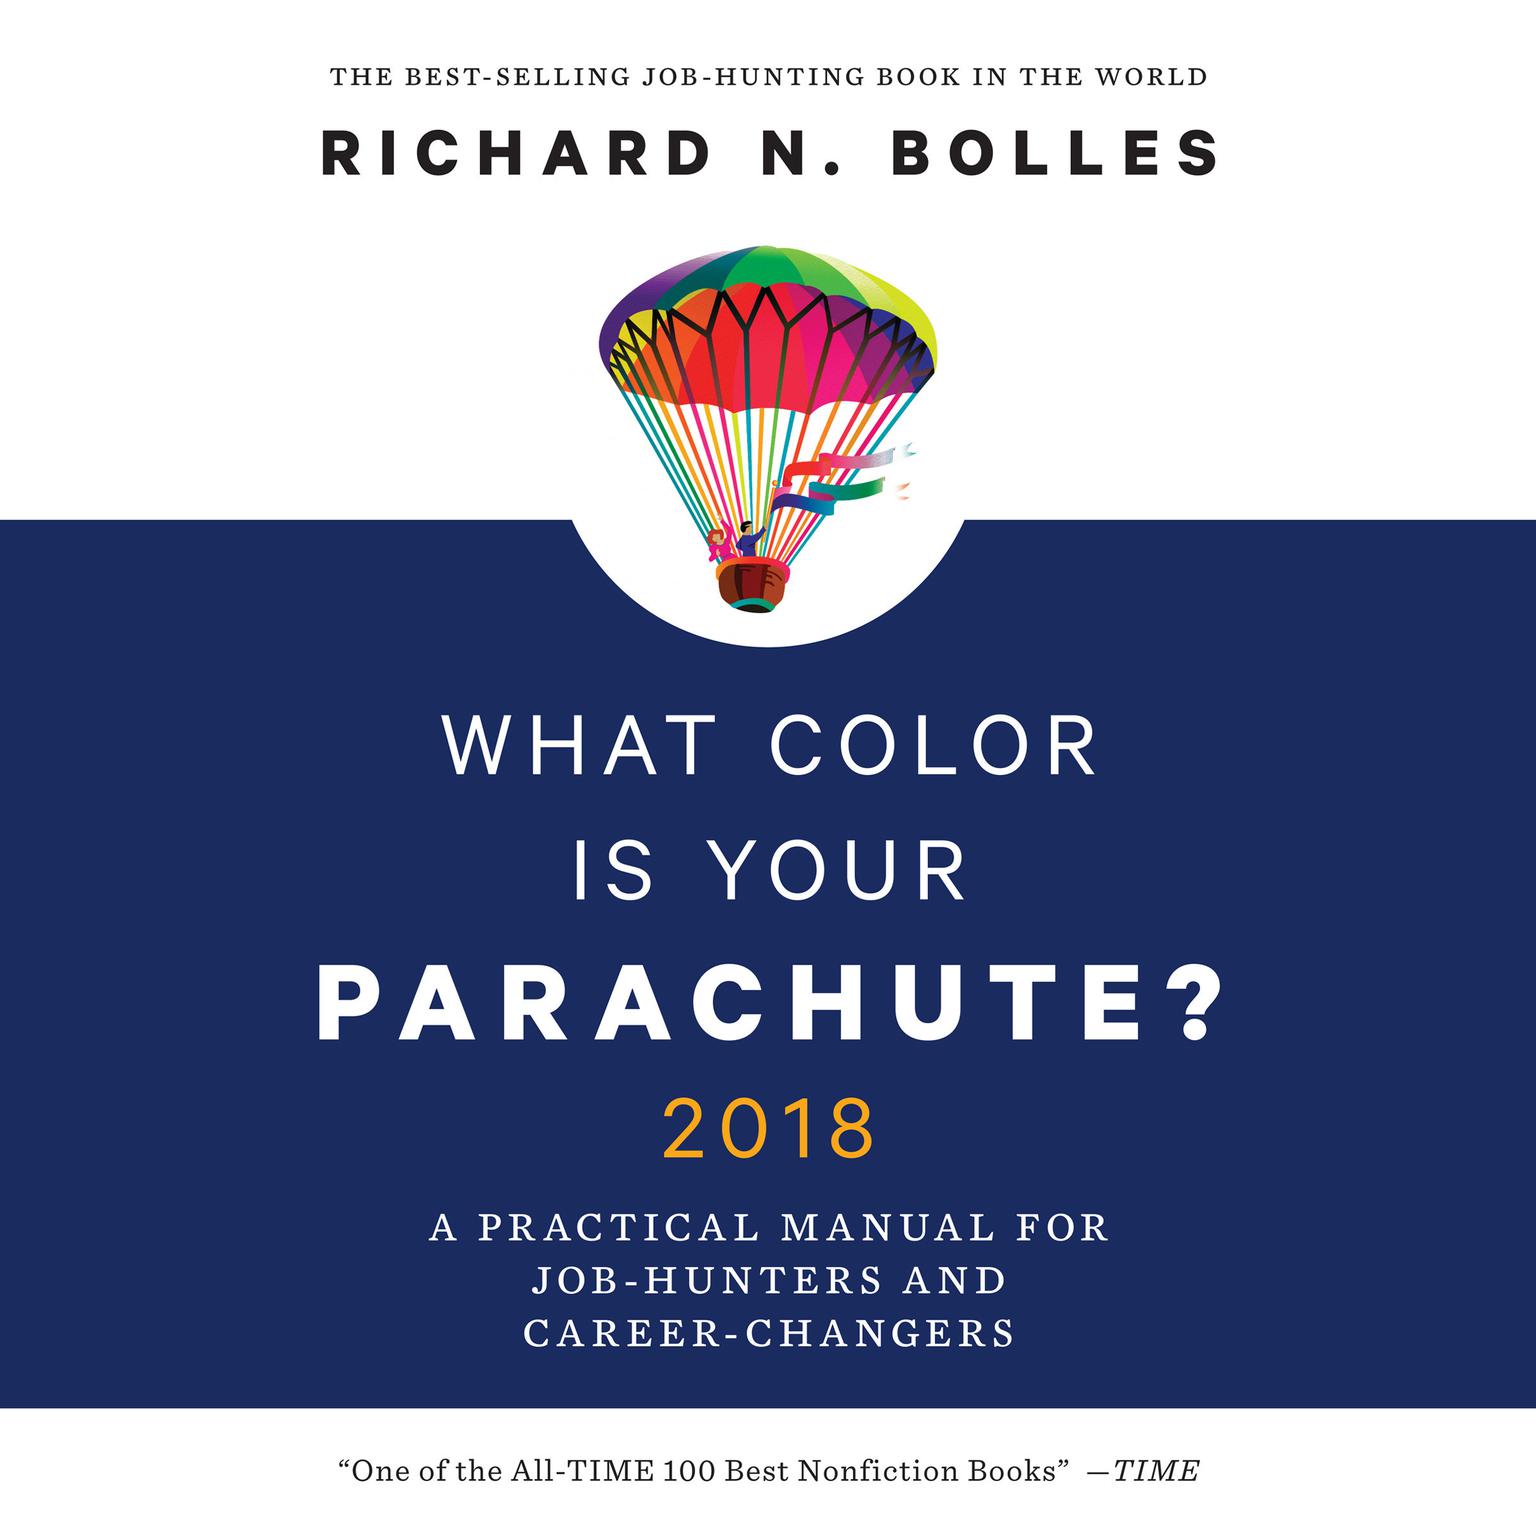 What Color is Your Parachute? 2018: A Practical Manual for Job-Hunters and Career-Changers Audiobook, by Richard N. Bolles